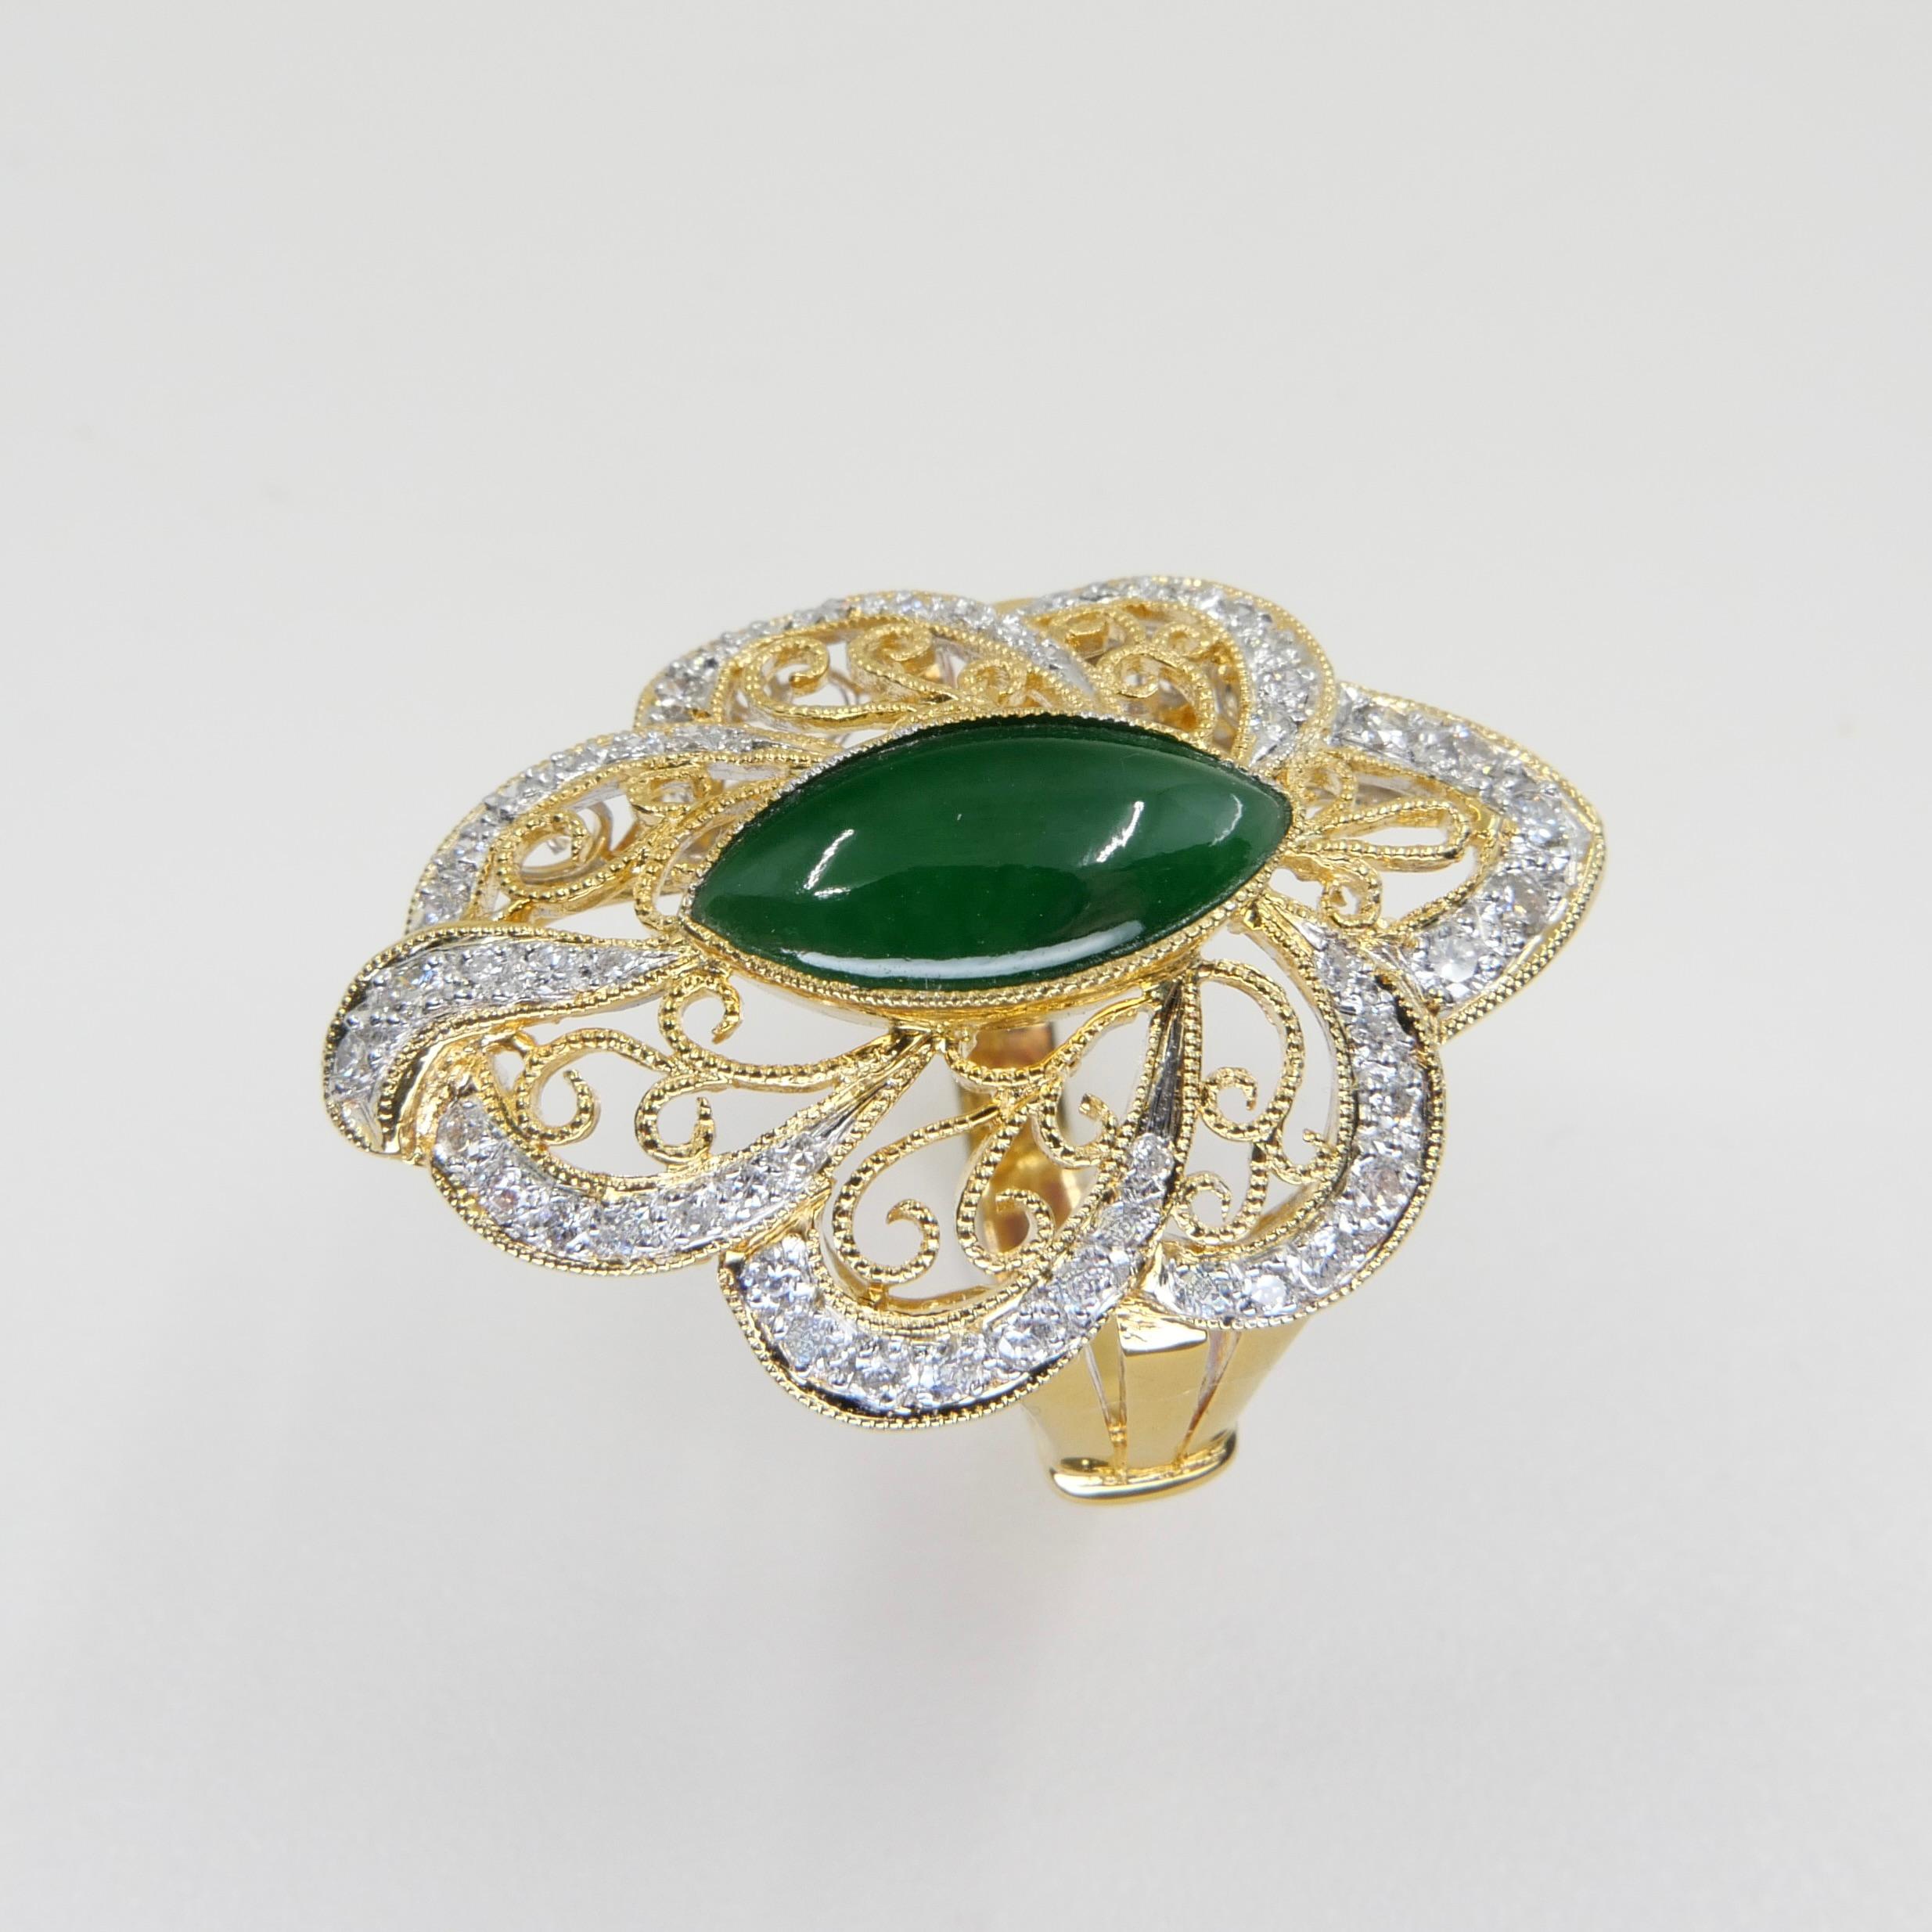 Marquise Cut Certified Jadeite Jade & Diamond Cocktail Ring, Intense Apple Green Color For Sale